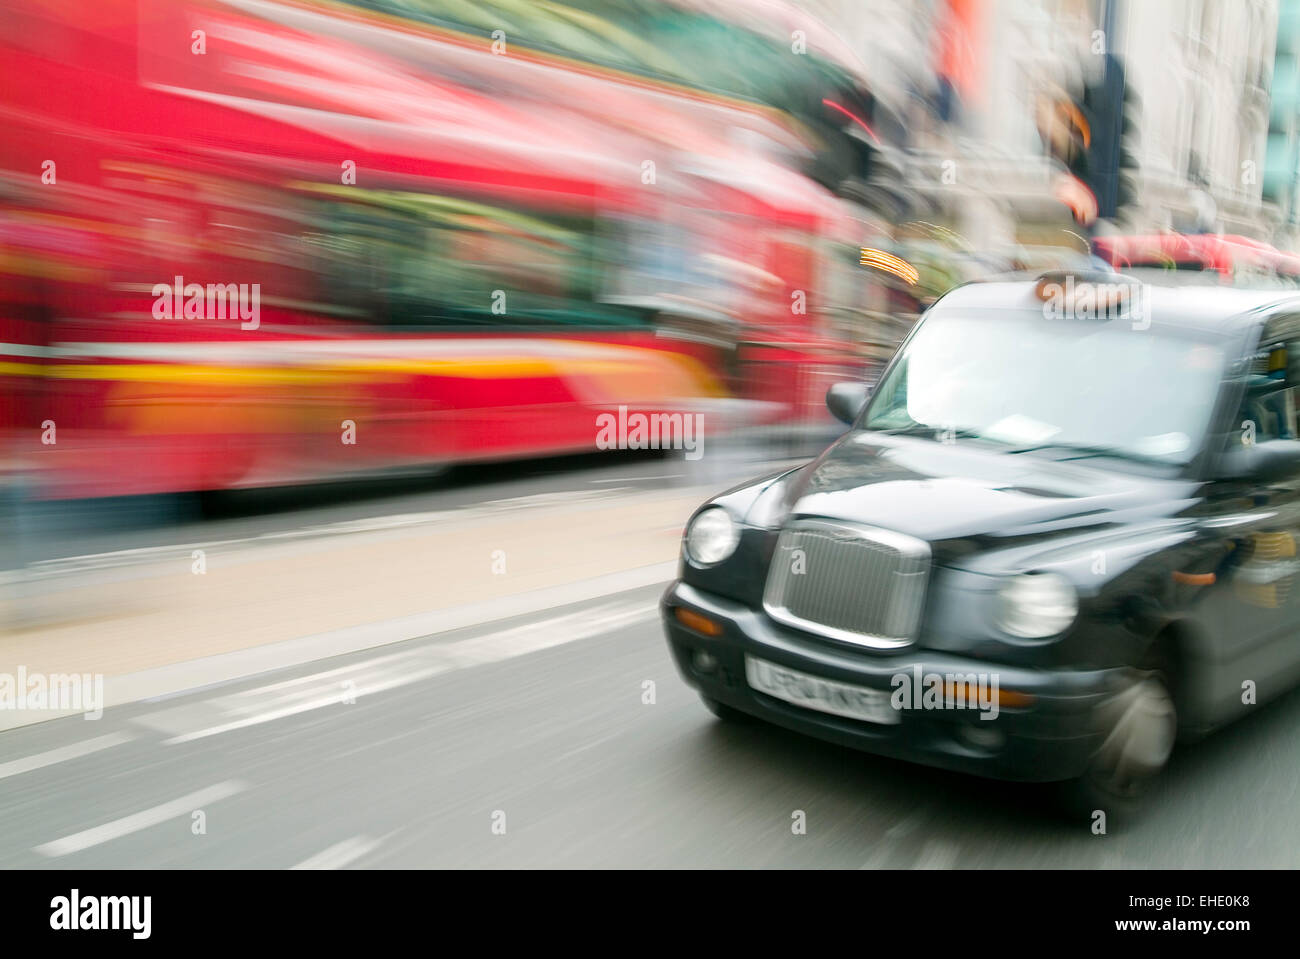 London Taxi in motion, red bus in background, London City United Kingdom GB Europe Stock Photo